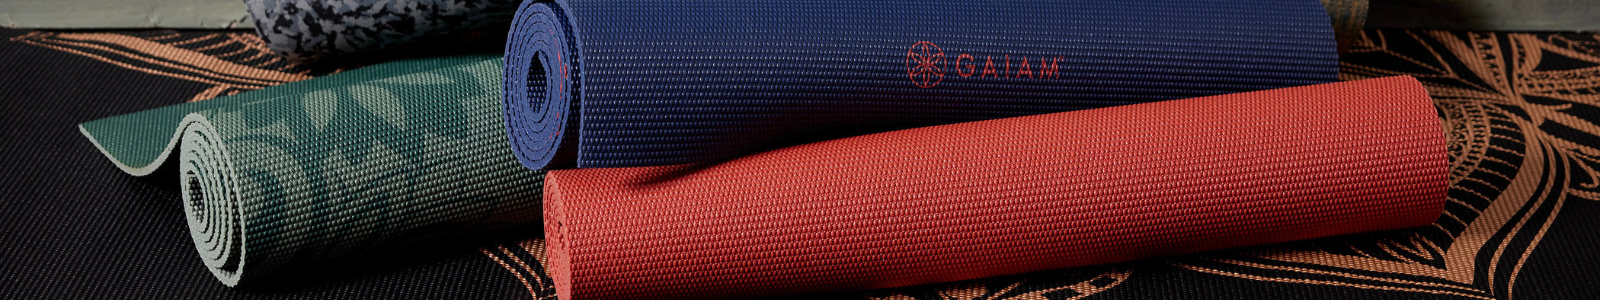 Rolled up yoga mats